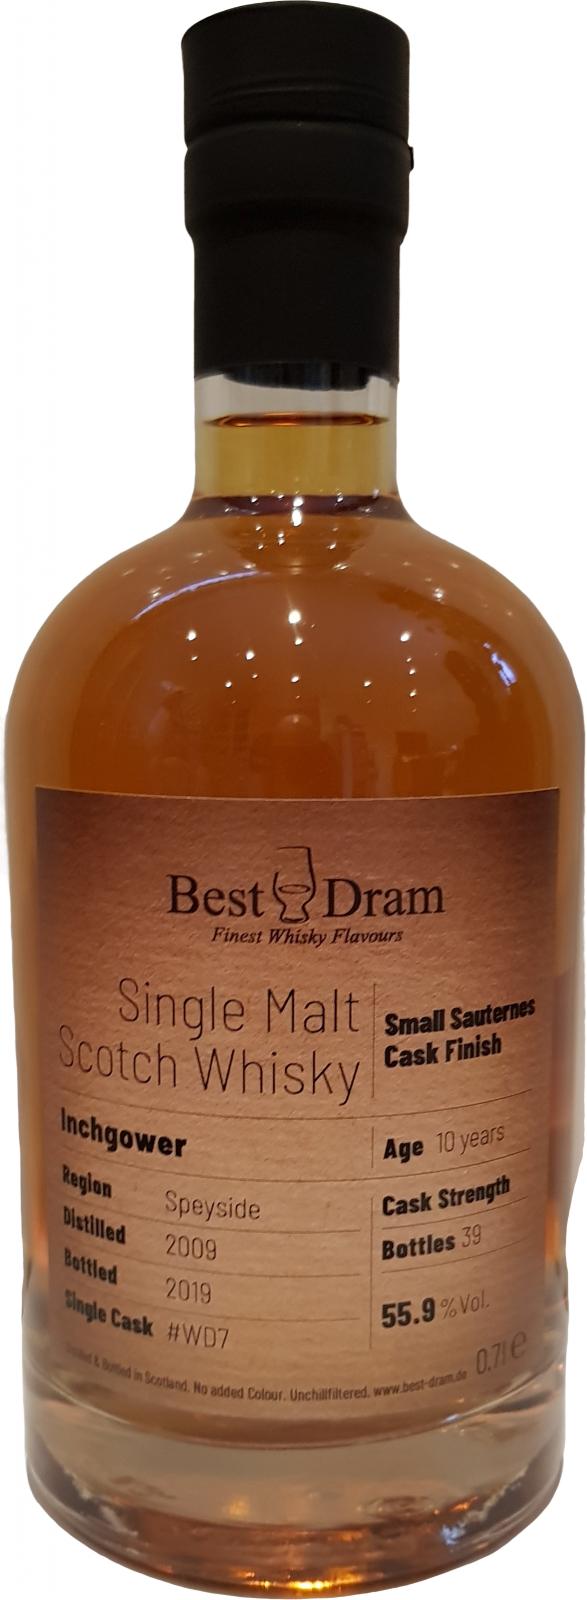 Inchgower 2009 BD Small Sauternes Cask Finish WD7 Specially selected for Whisky Fairs 55.9% 700ml